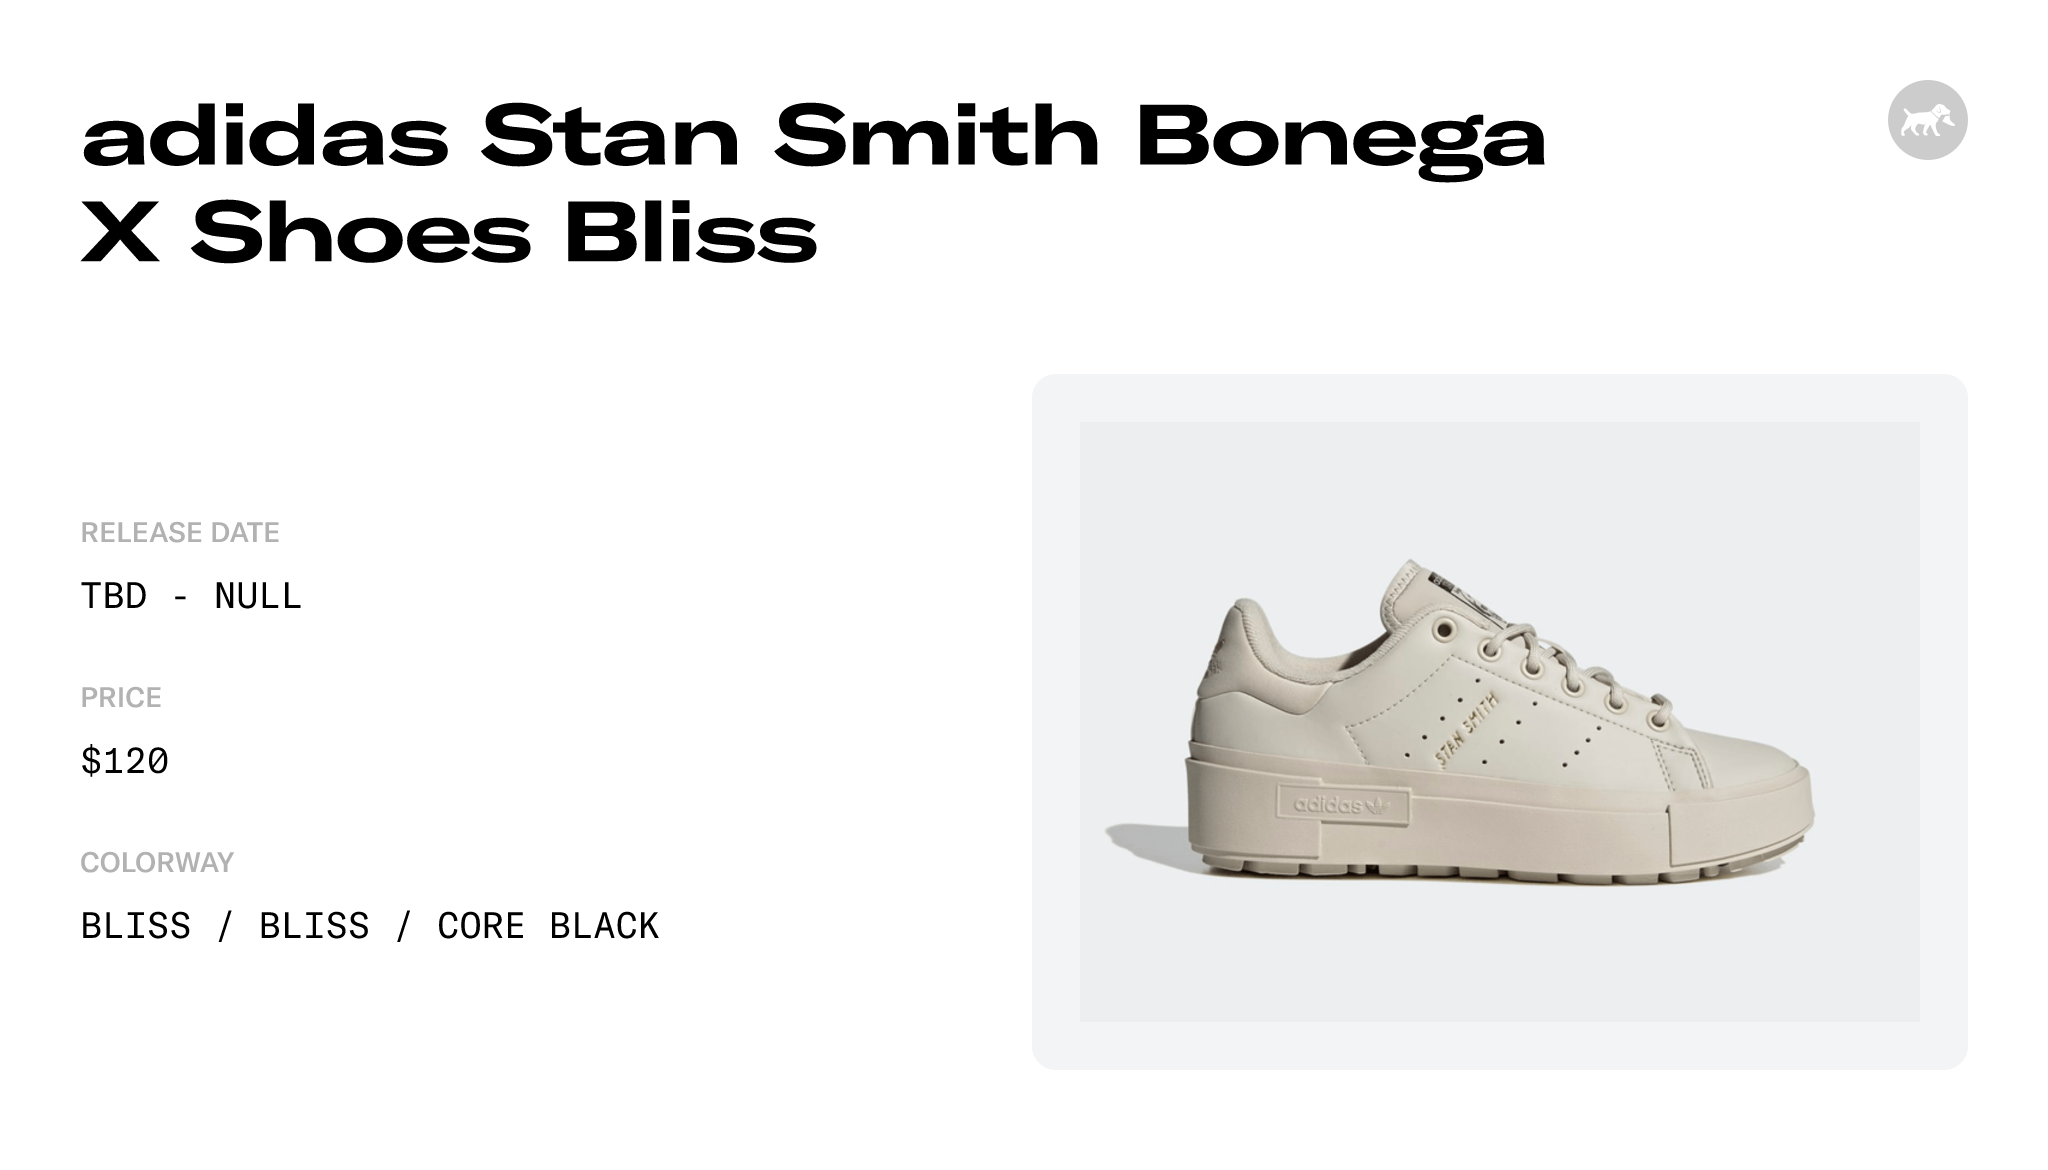 Release Date Bliss Smith X GY1499 Shoes Bonega adidas - Stan and Raffles